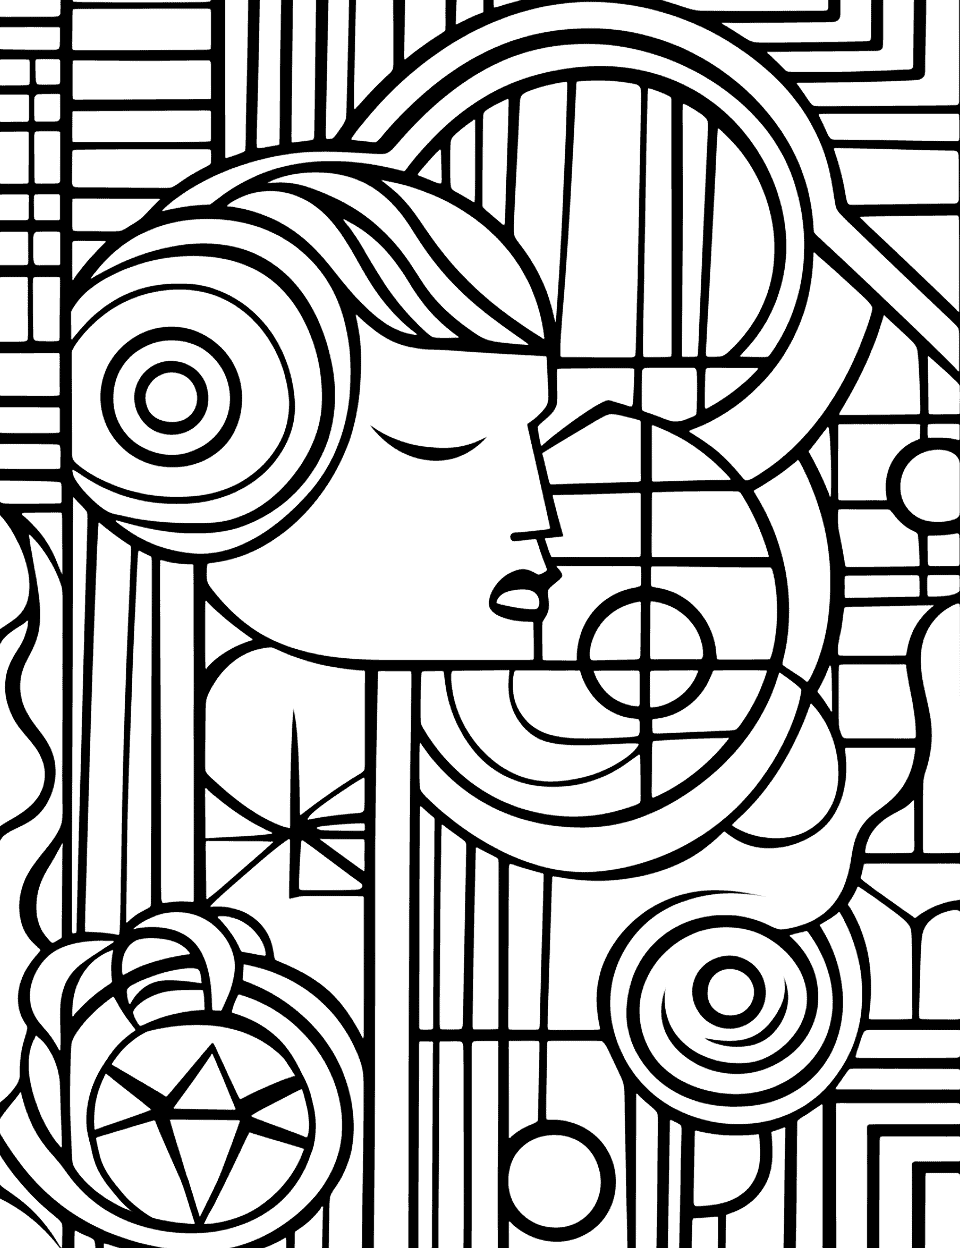 Abstract Art Adult Coloring Page - A coloring page filled with abstract art featuring a variety of shapes, patterns, and lines.